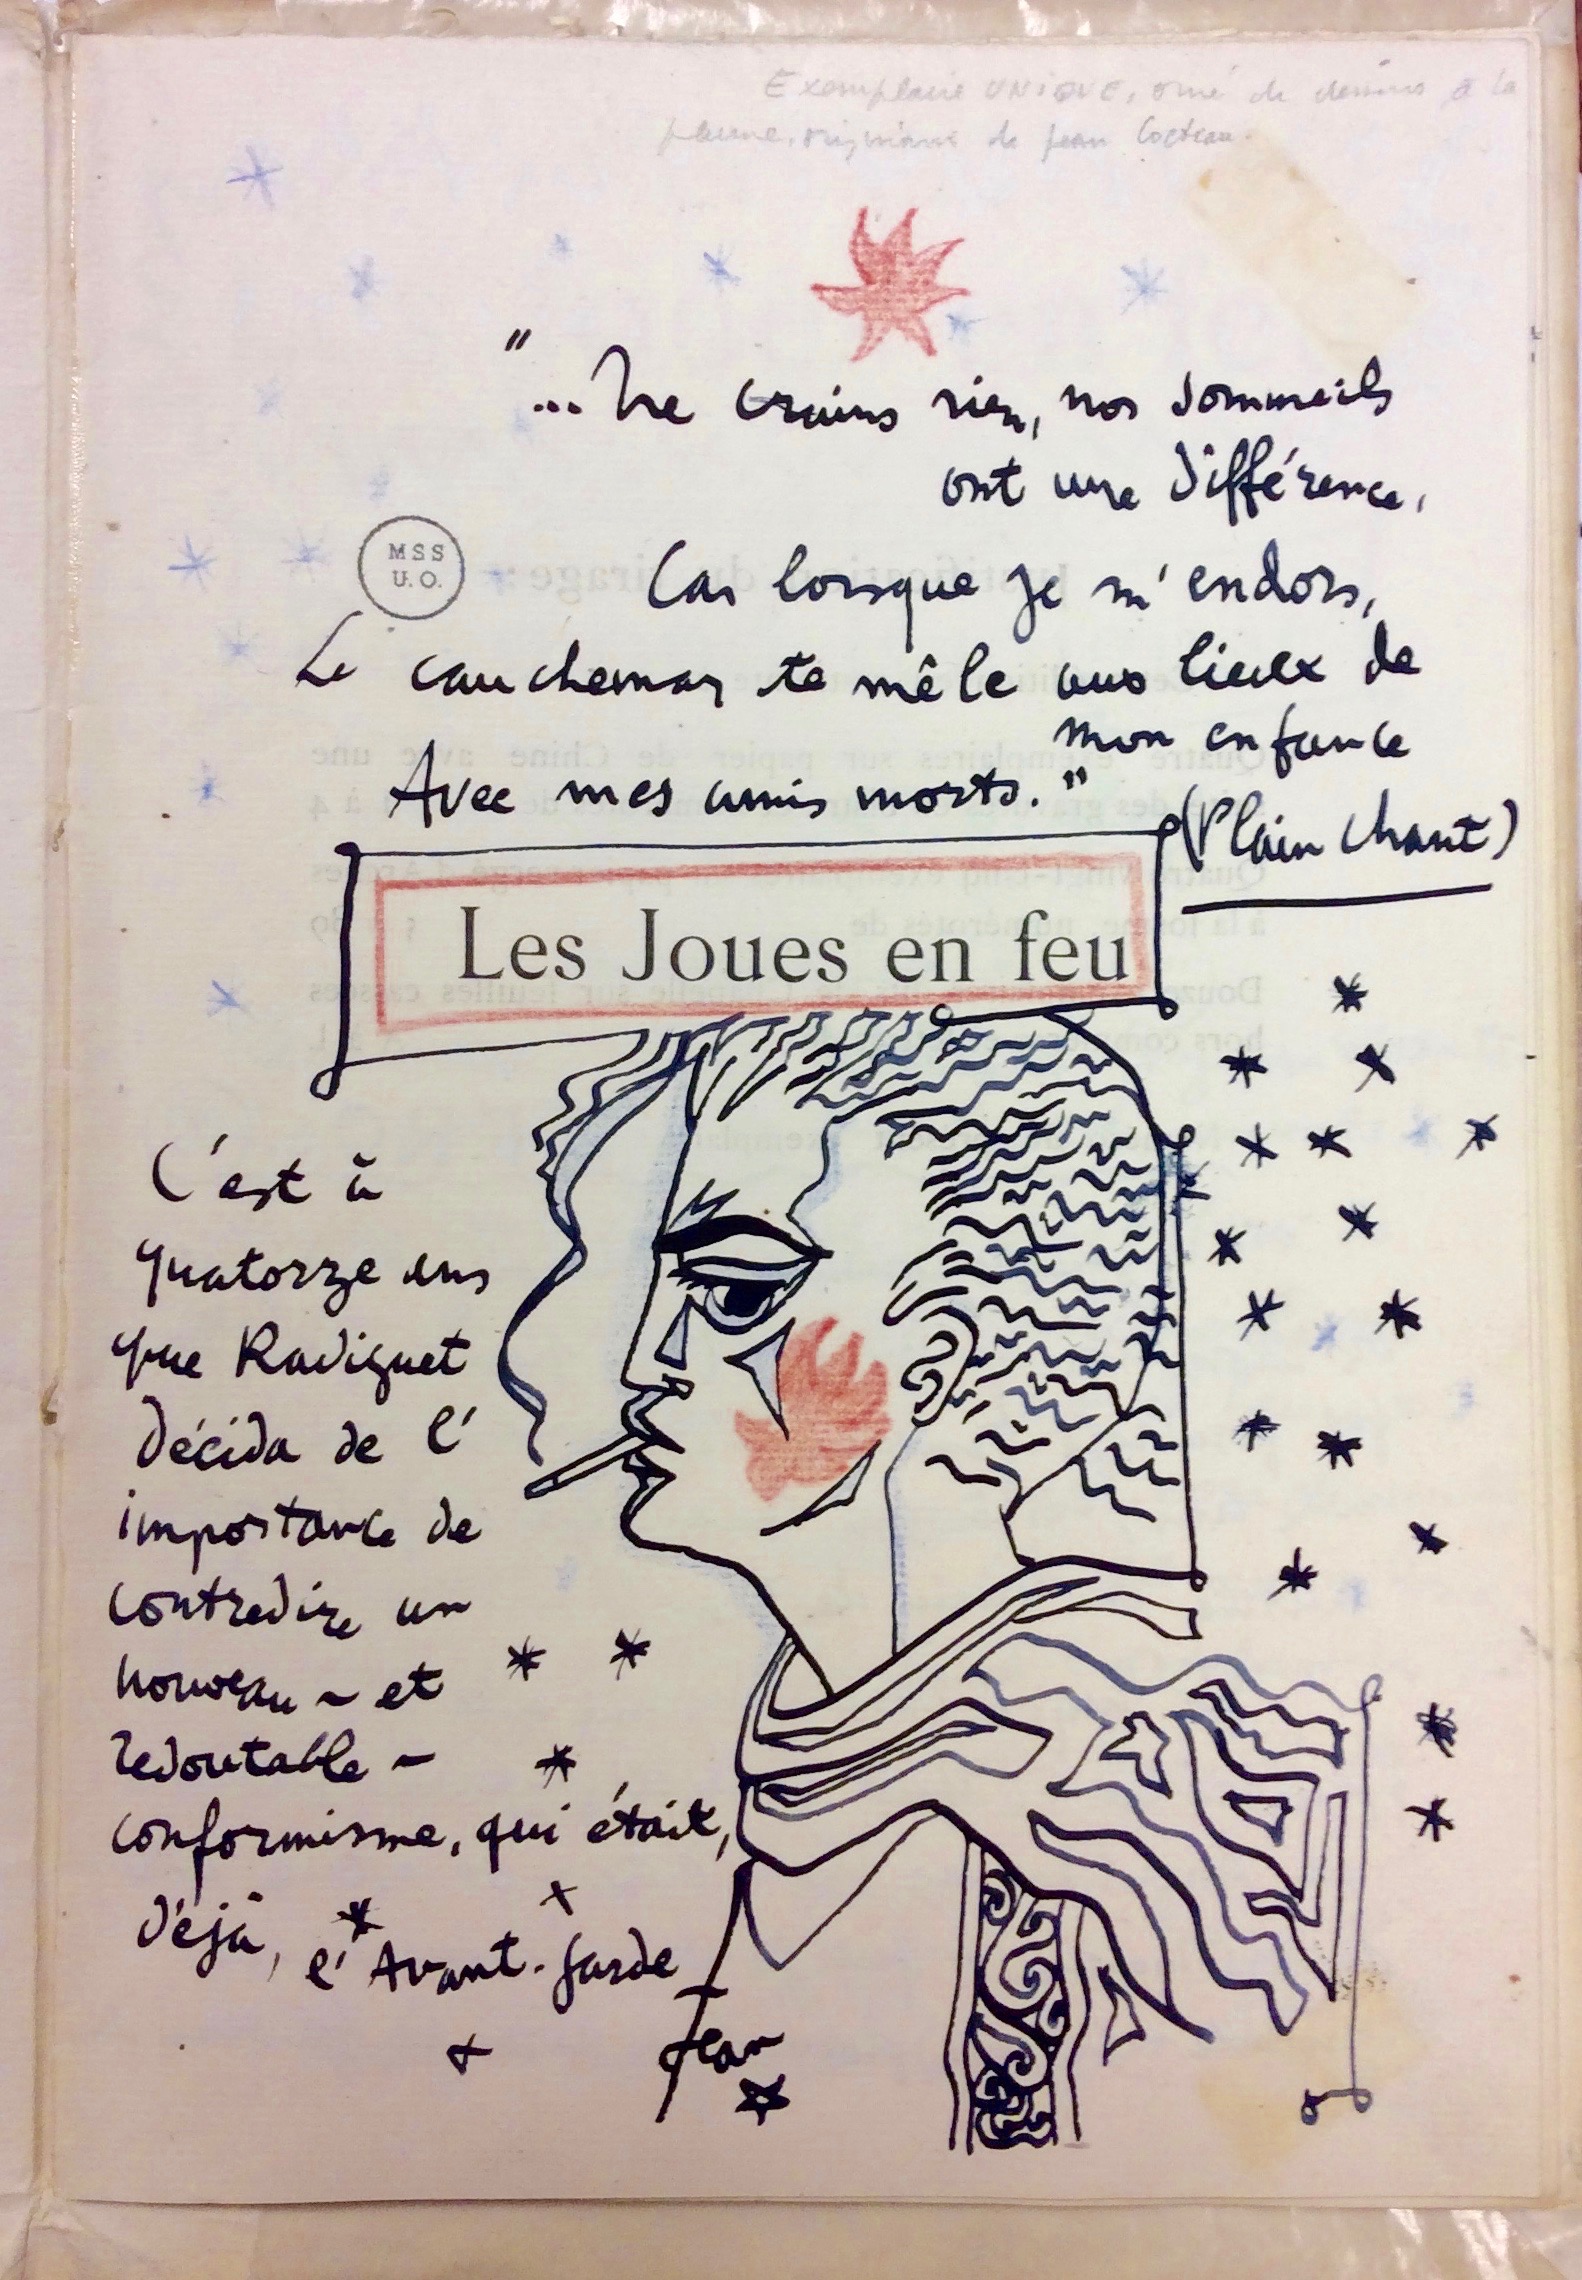 Les Joues en feu - Collection of poems by Raymond Radiguet, French manuscript collection, 30-005-S18-F3, ©Archives and Special Collections